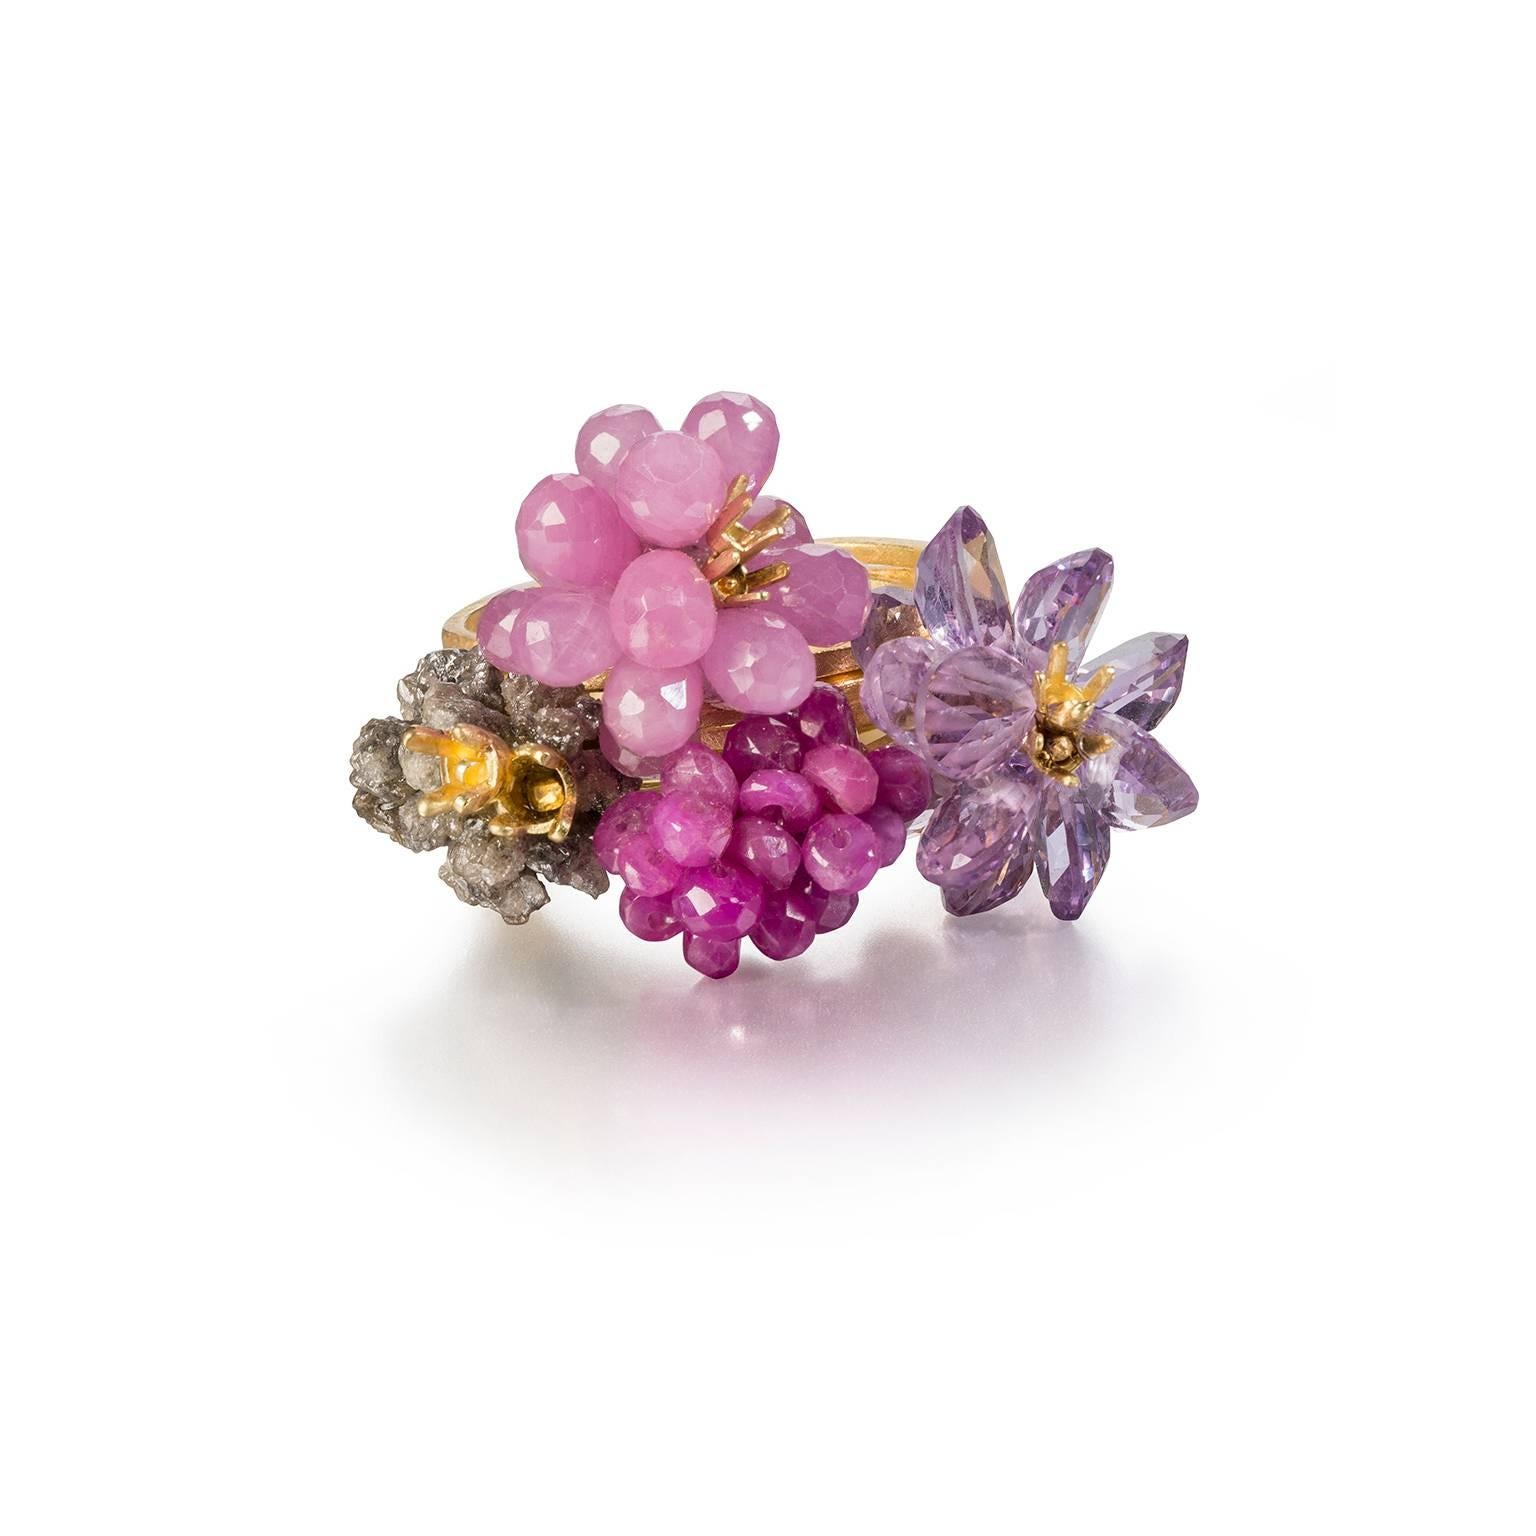 Exquisite Donna Brennan matte 18kt Gold Cocktail Ring featuring a clustered  array of Rough Diamonds, Ruby, Pink Tormaline & Lilac Amethyst stones. 7 shank rink in a size 8 (size Q). Hallmarked by Goldsmiths' Hall, London.

Donna's work typically